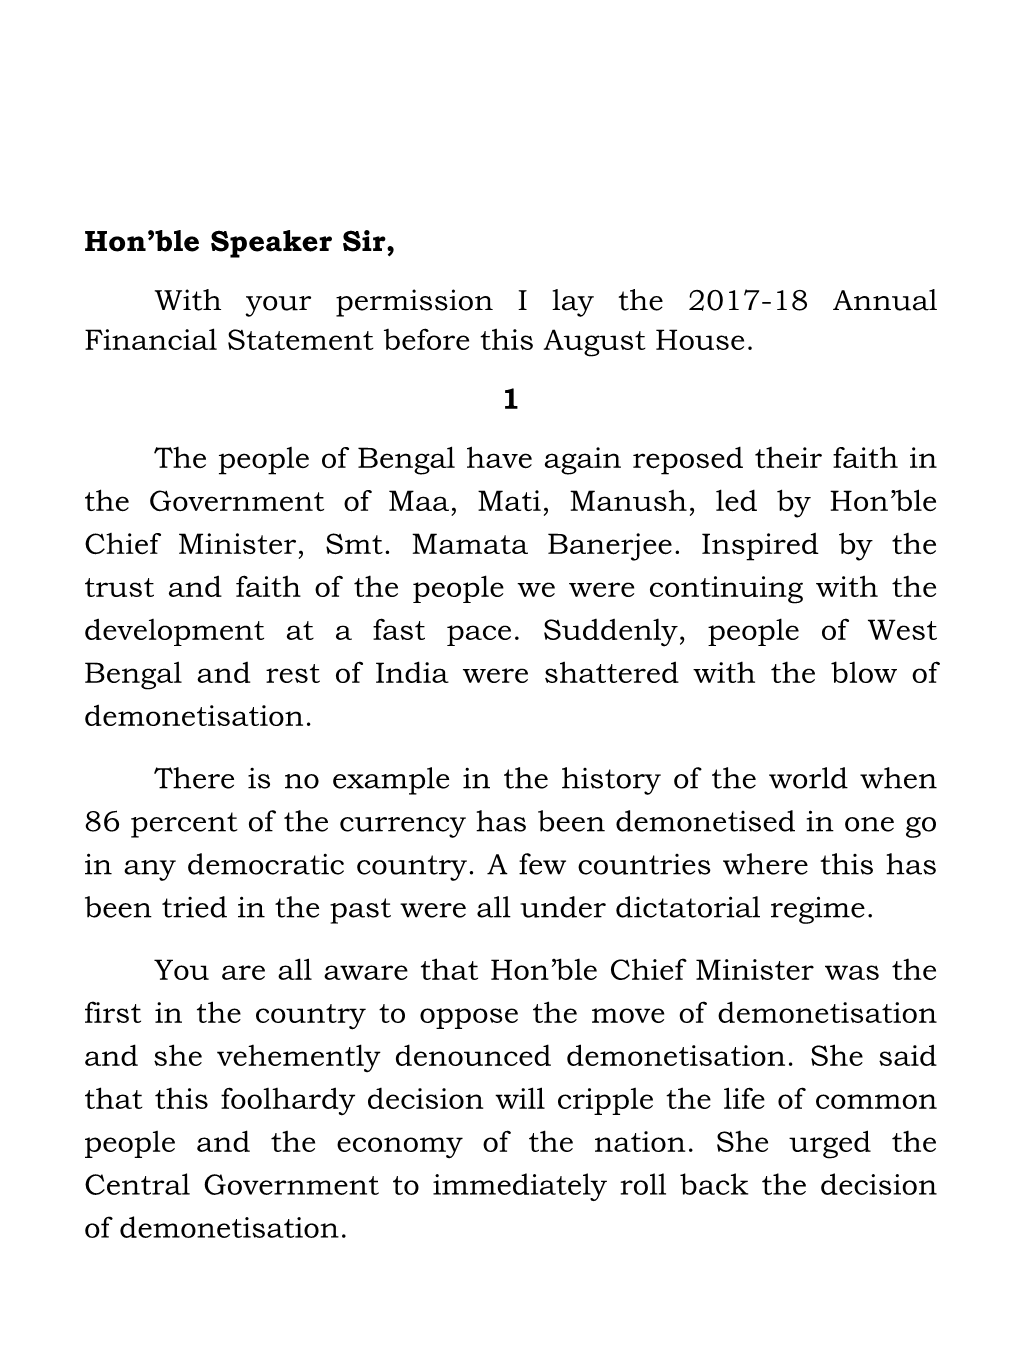 Hon'ble Speaker Sir, with Your Permission I Lay the 2017-18